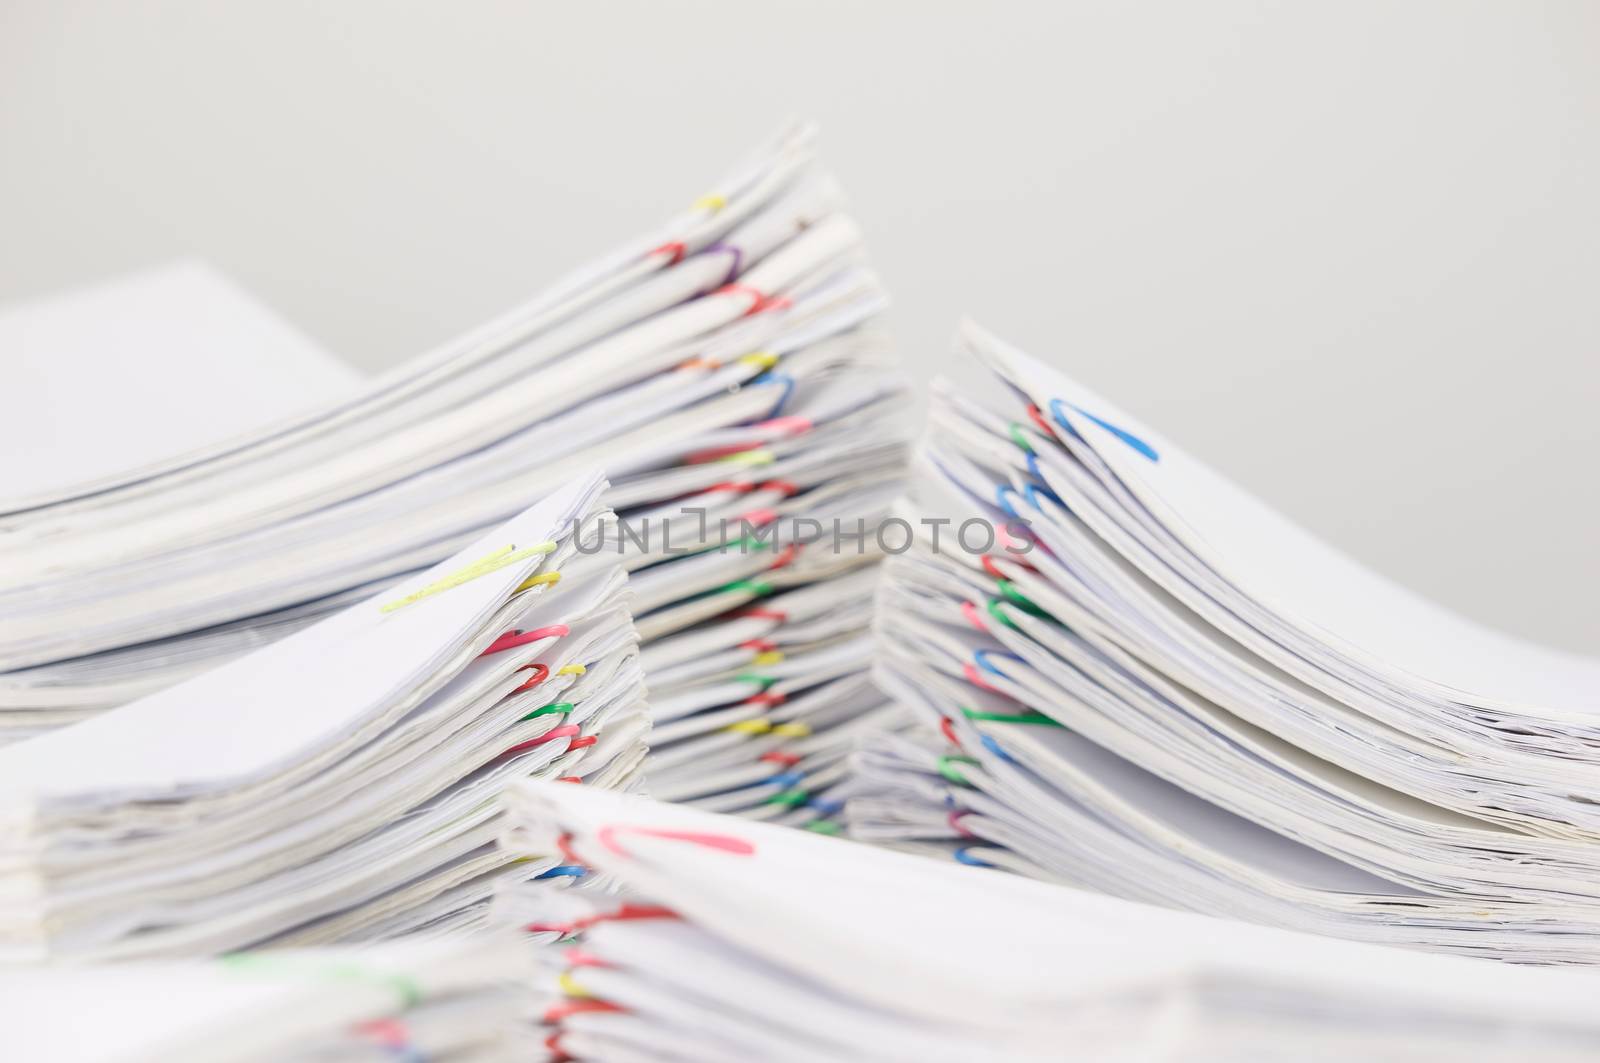 Pile overload document of receipt and report with colorful paperclip have blur pile paperwork foreground and background on white table.